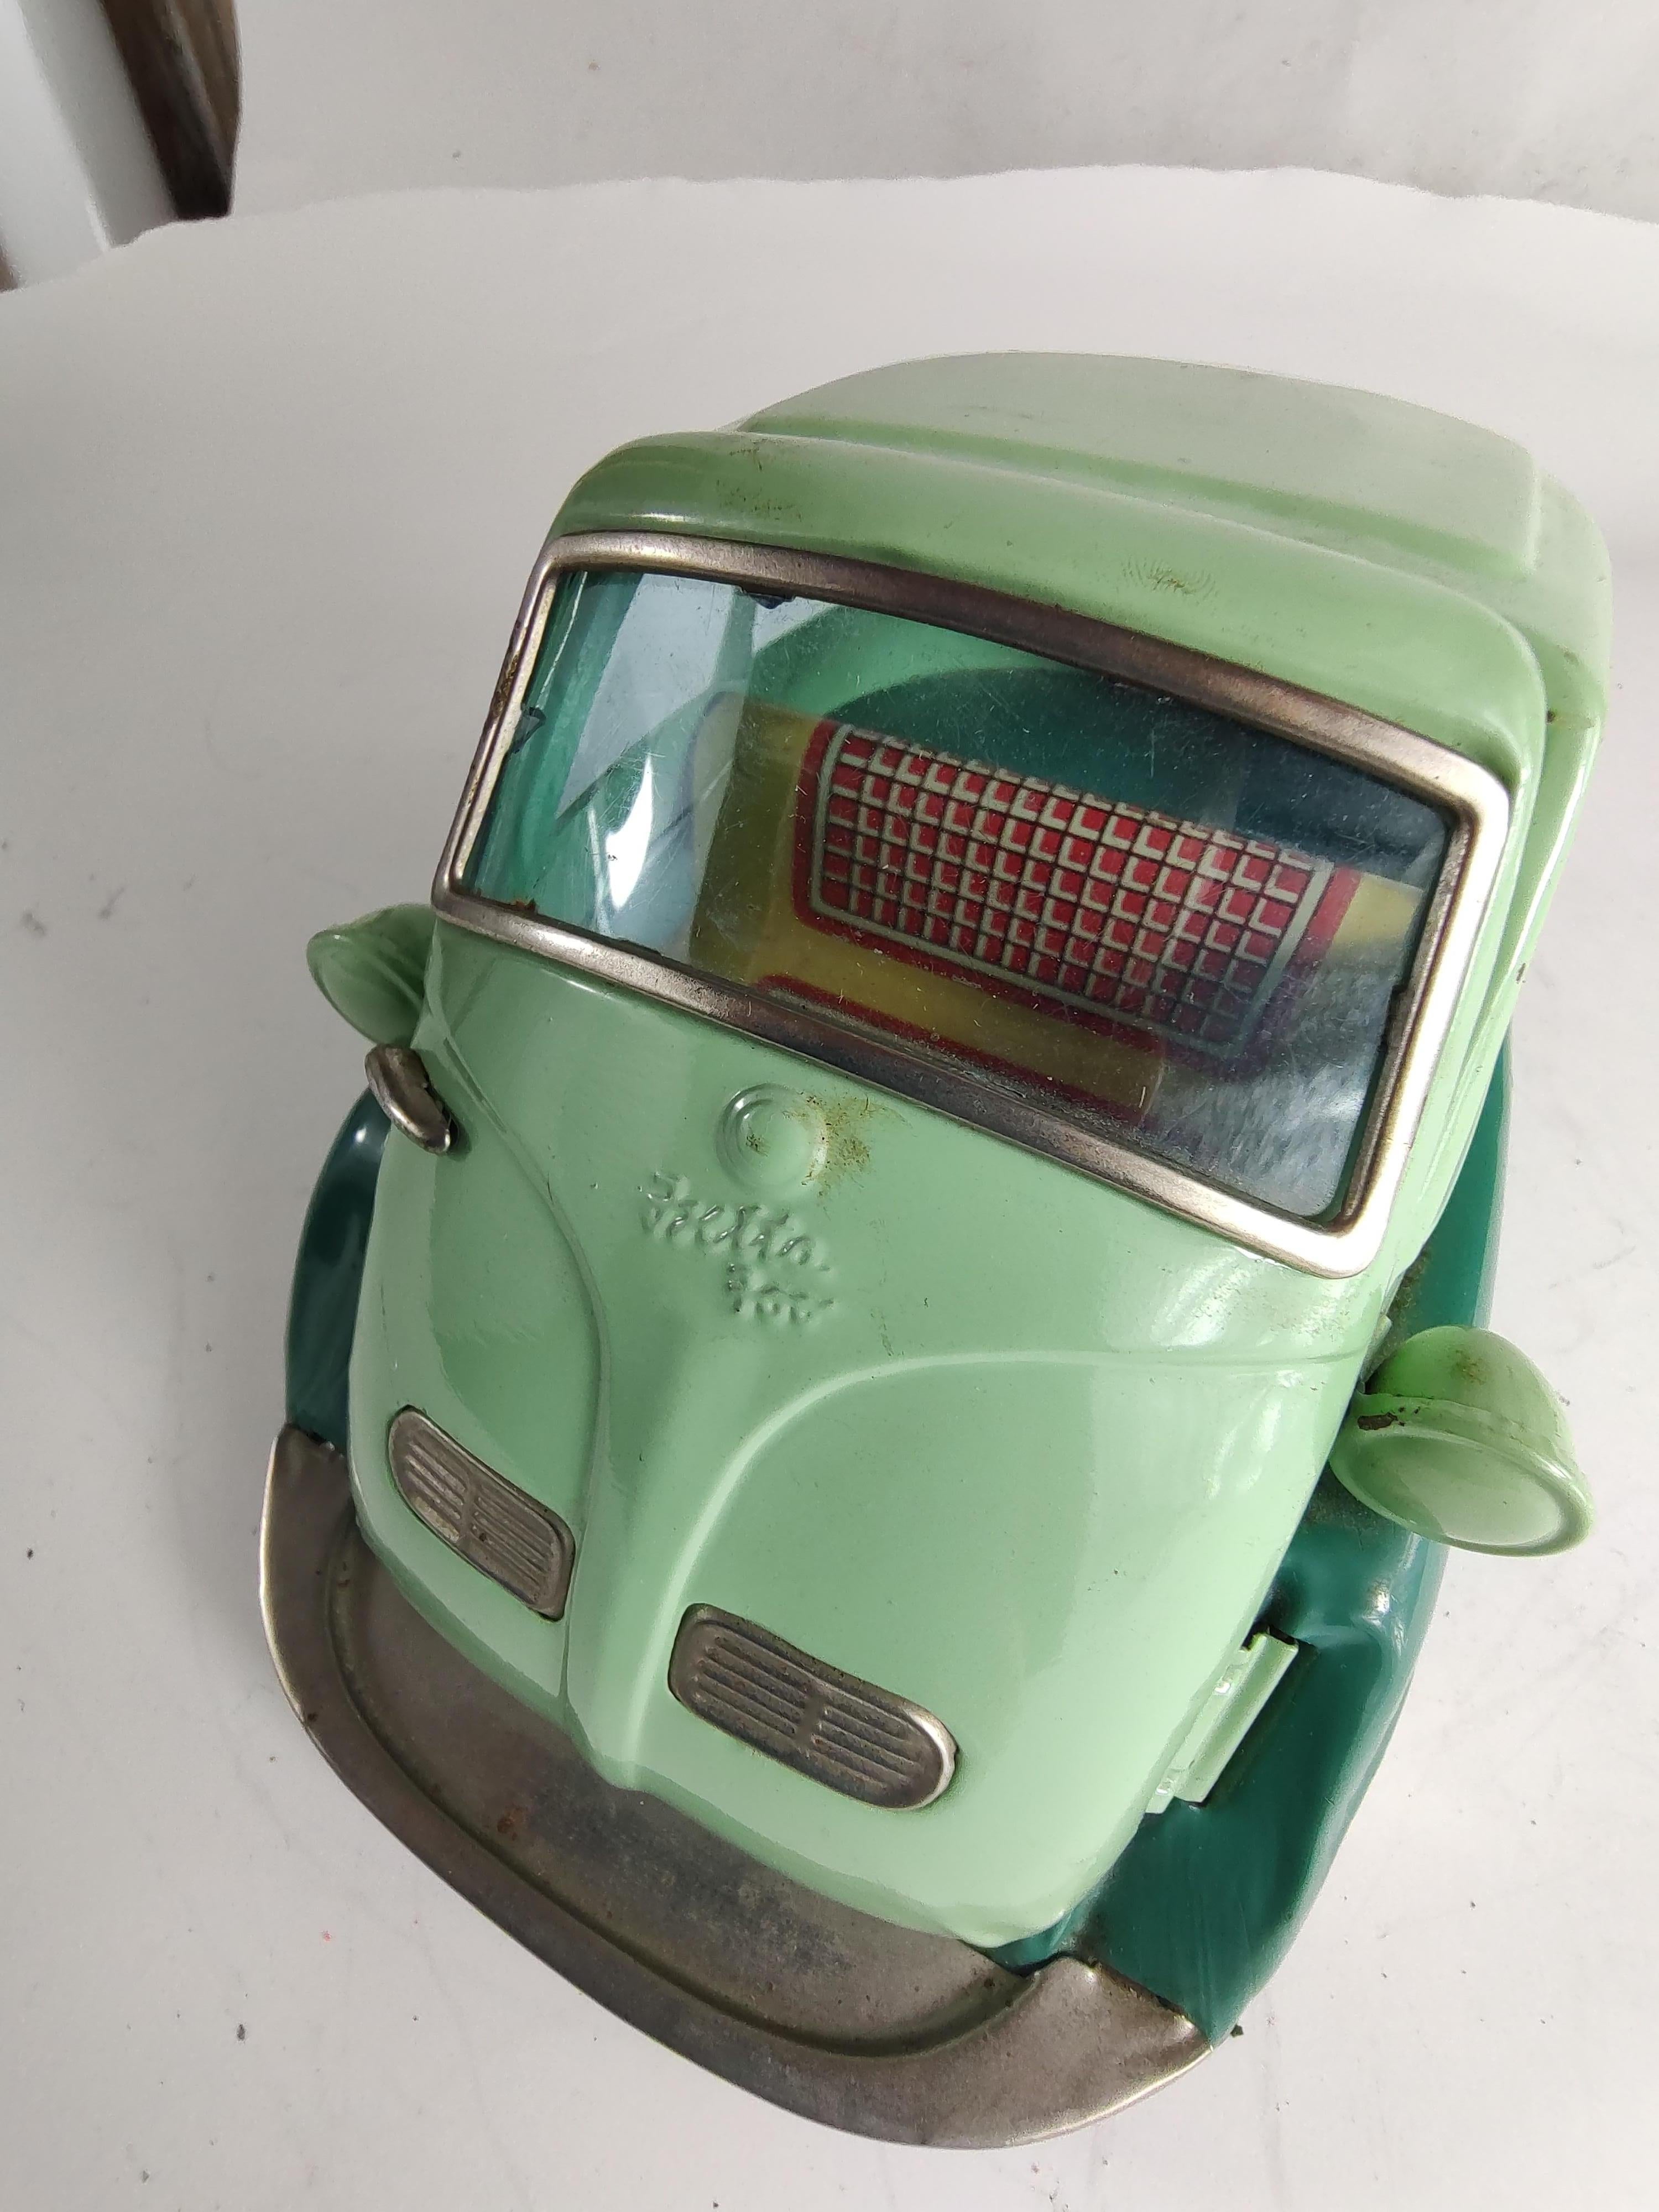 Fabulous and as near mint as it gets. Never played with and in excellent vintage condition. This and 16 other late fifties and early sixties japanese tin toys have come out of the attic. The Isetta is in magnificent condition with little blemishes